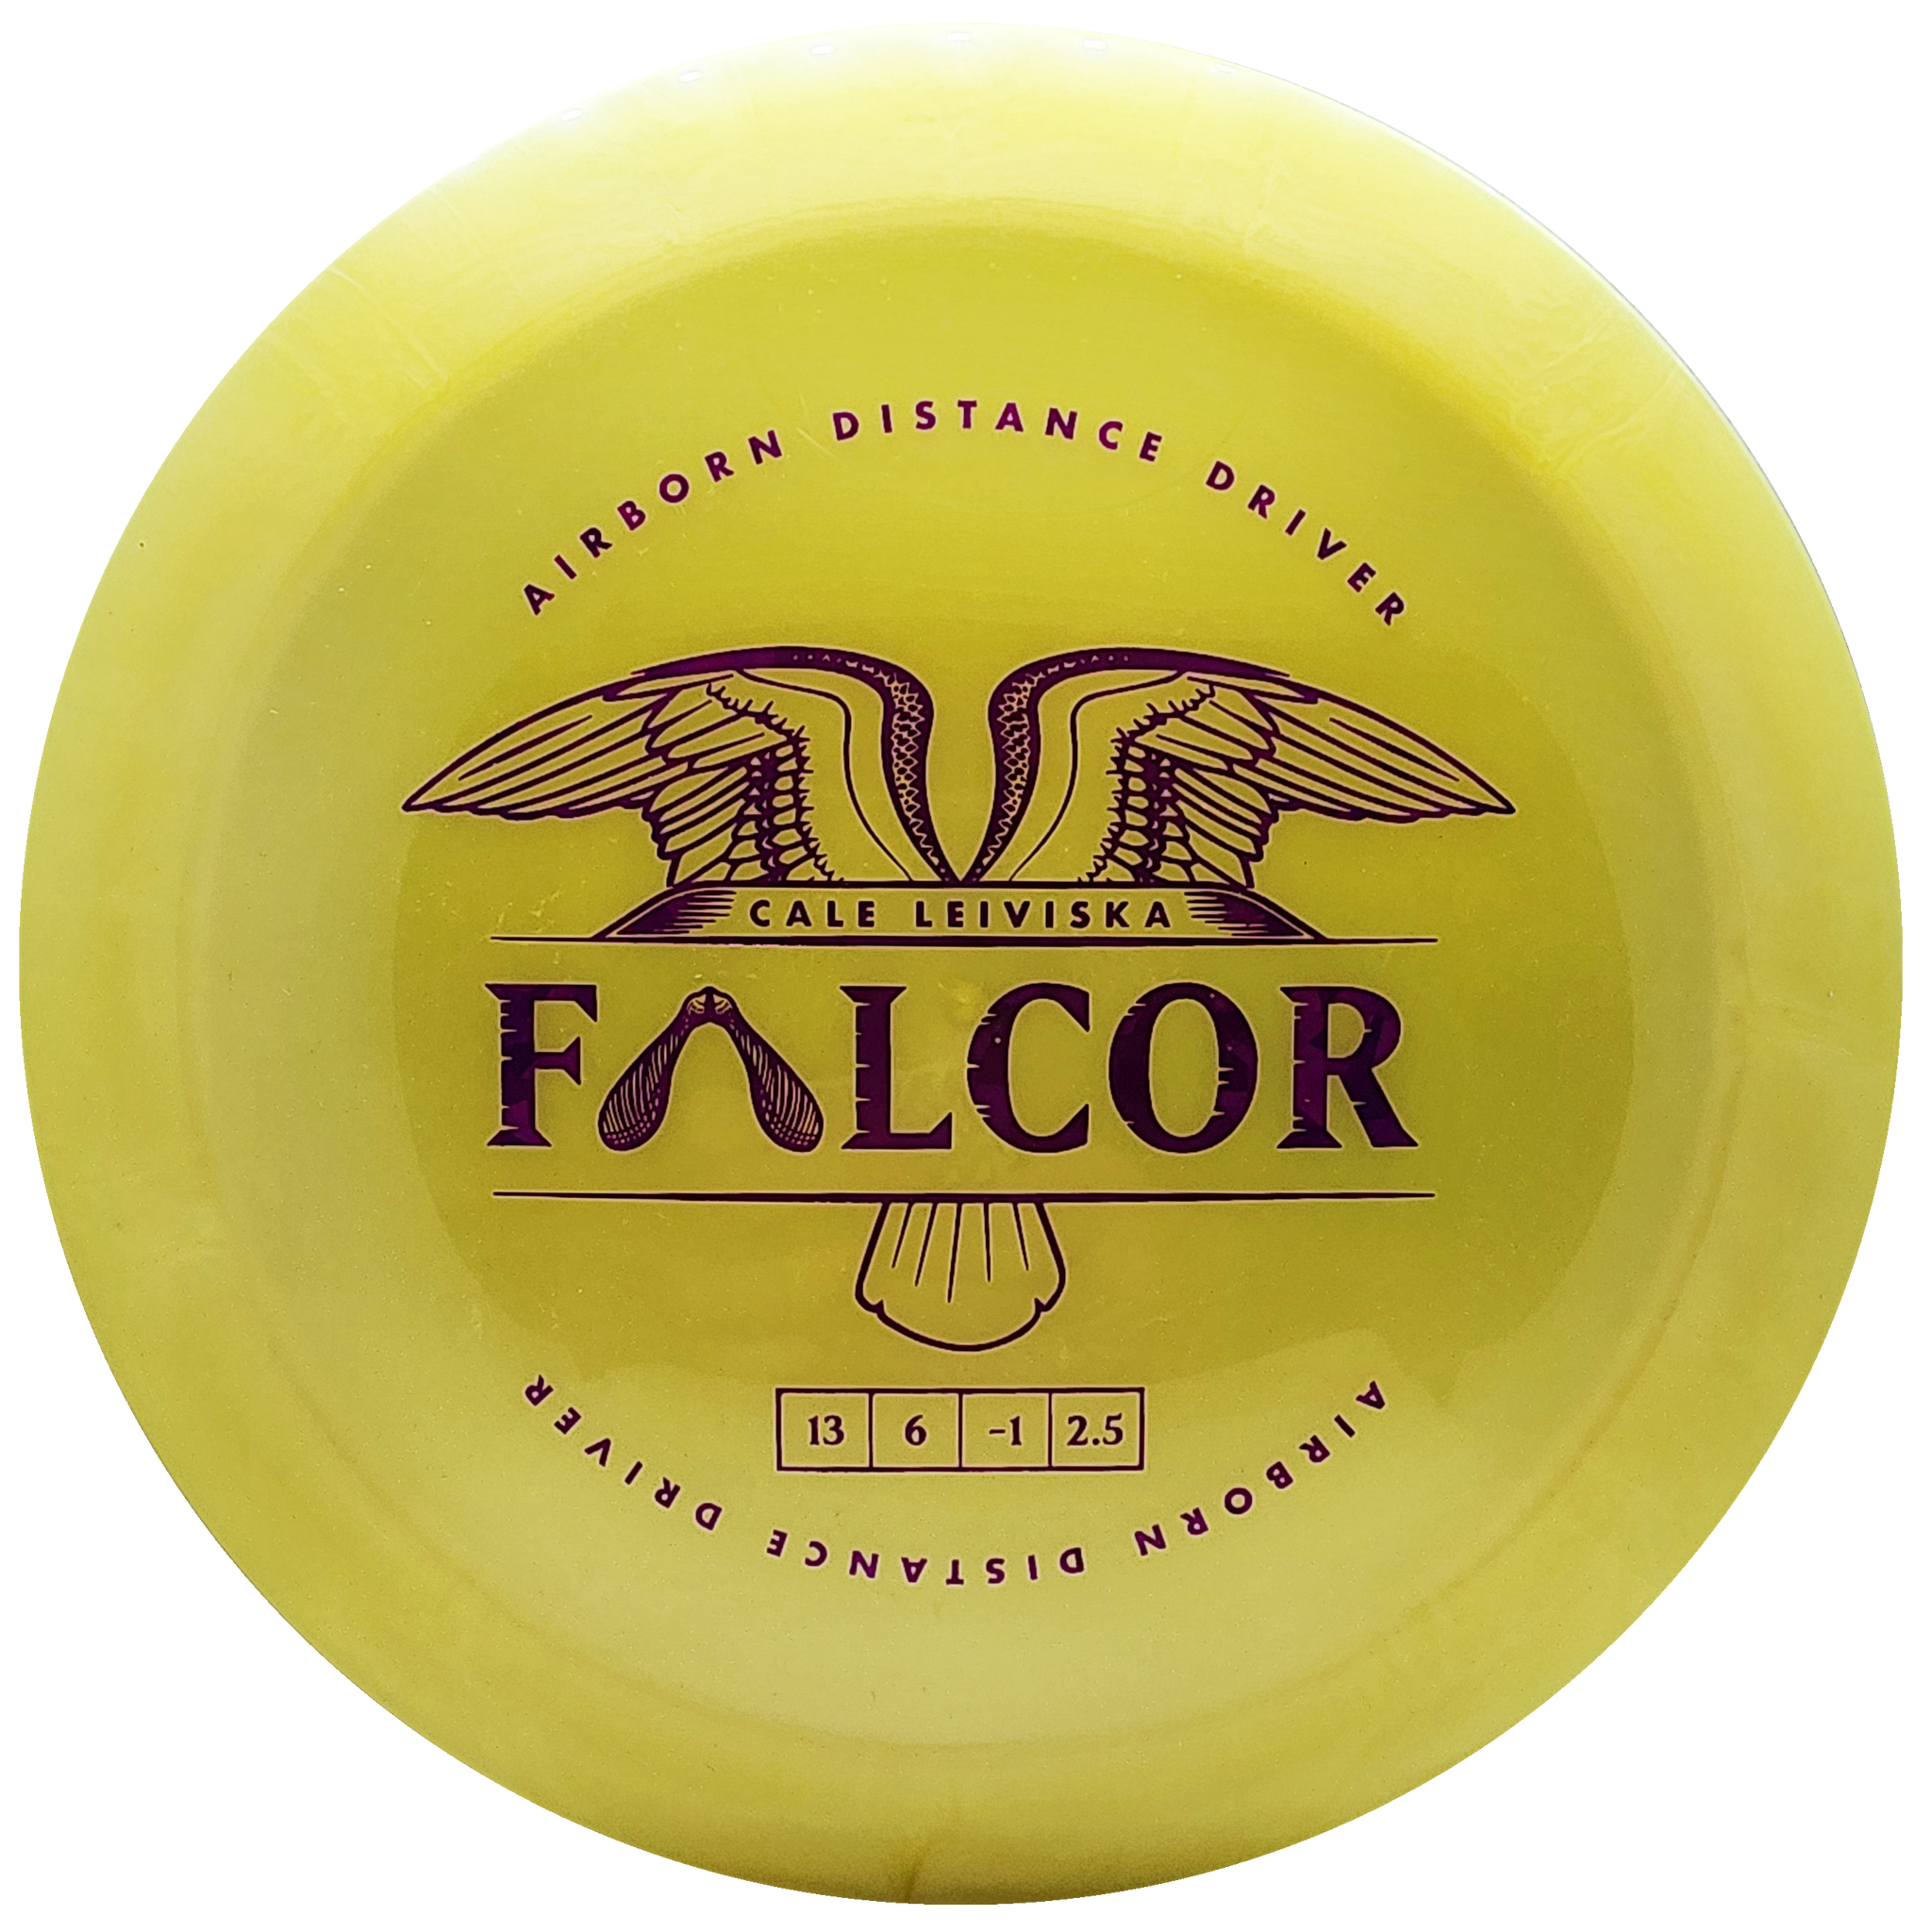 Prodigy: Airborn Falcor Distance Driver - 500 Plastic - Yellow/Pink